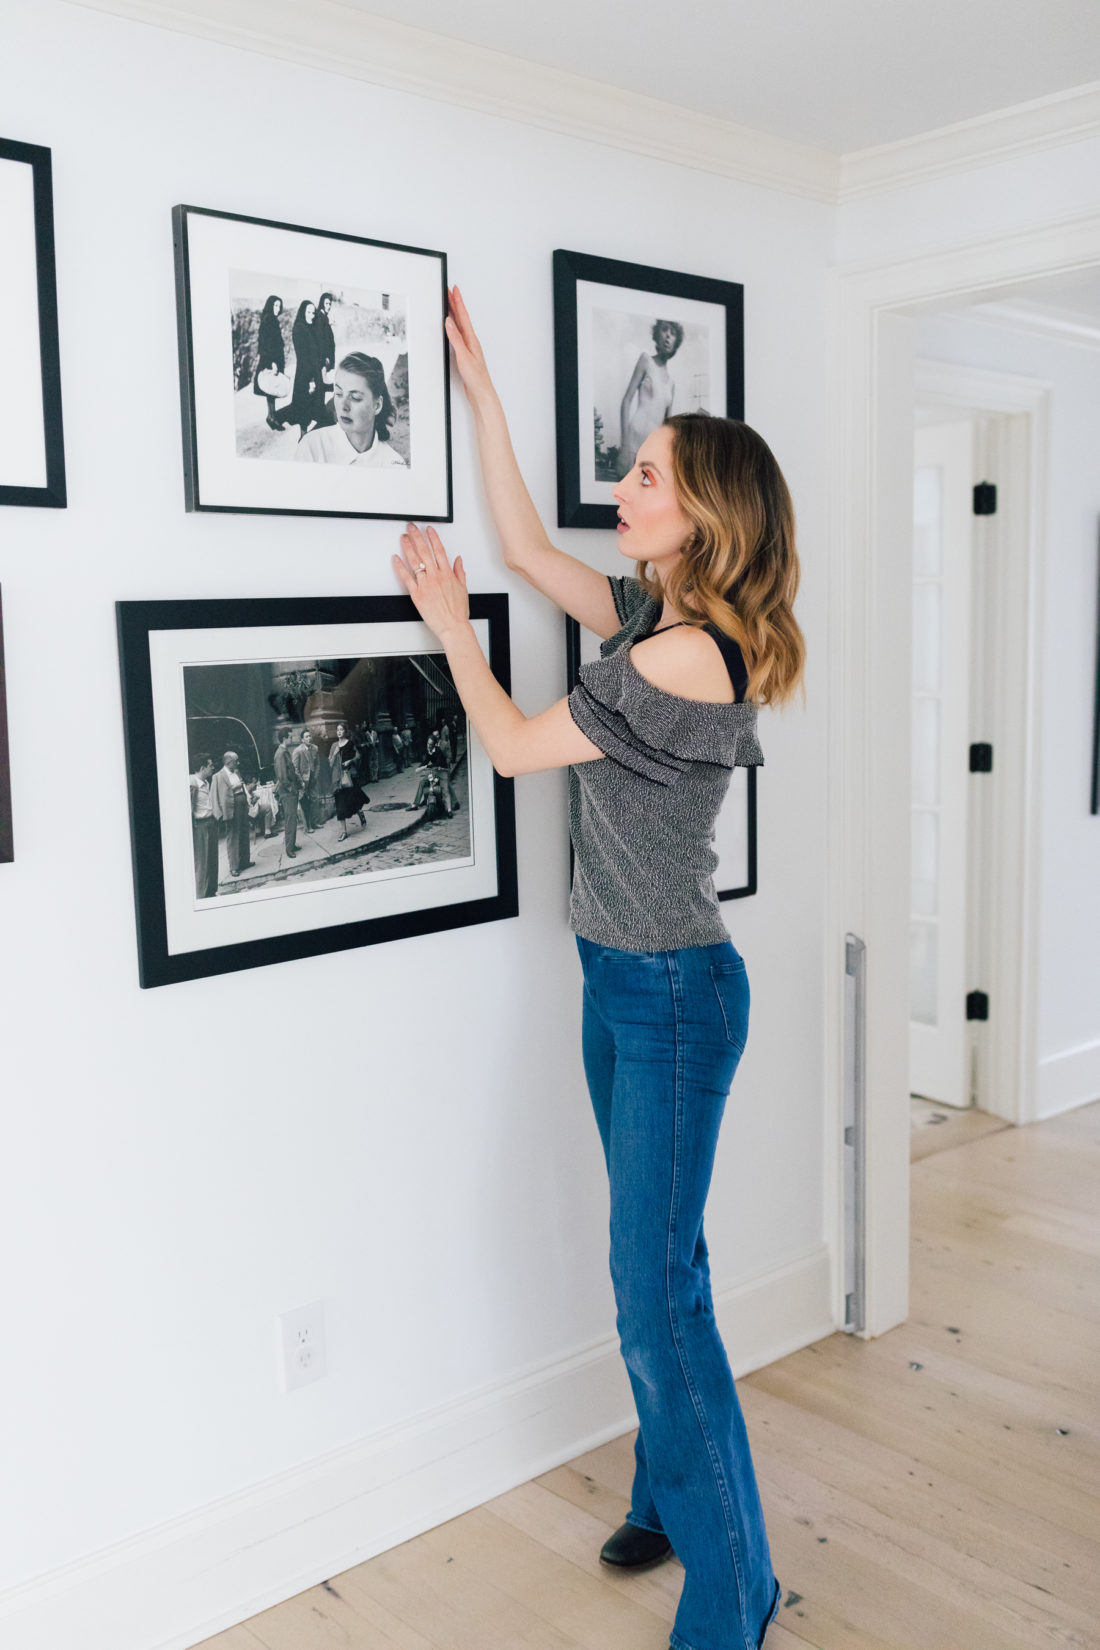 Eva Amurri Martino stands in the hallways of her connecticut home and selects a black and white photograph from the wall as she decides what to pack and what to give away before her family's move